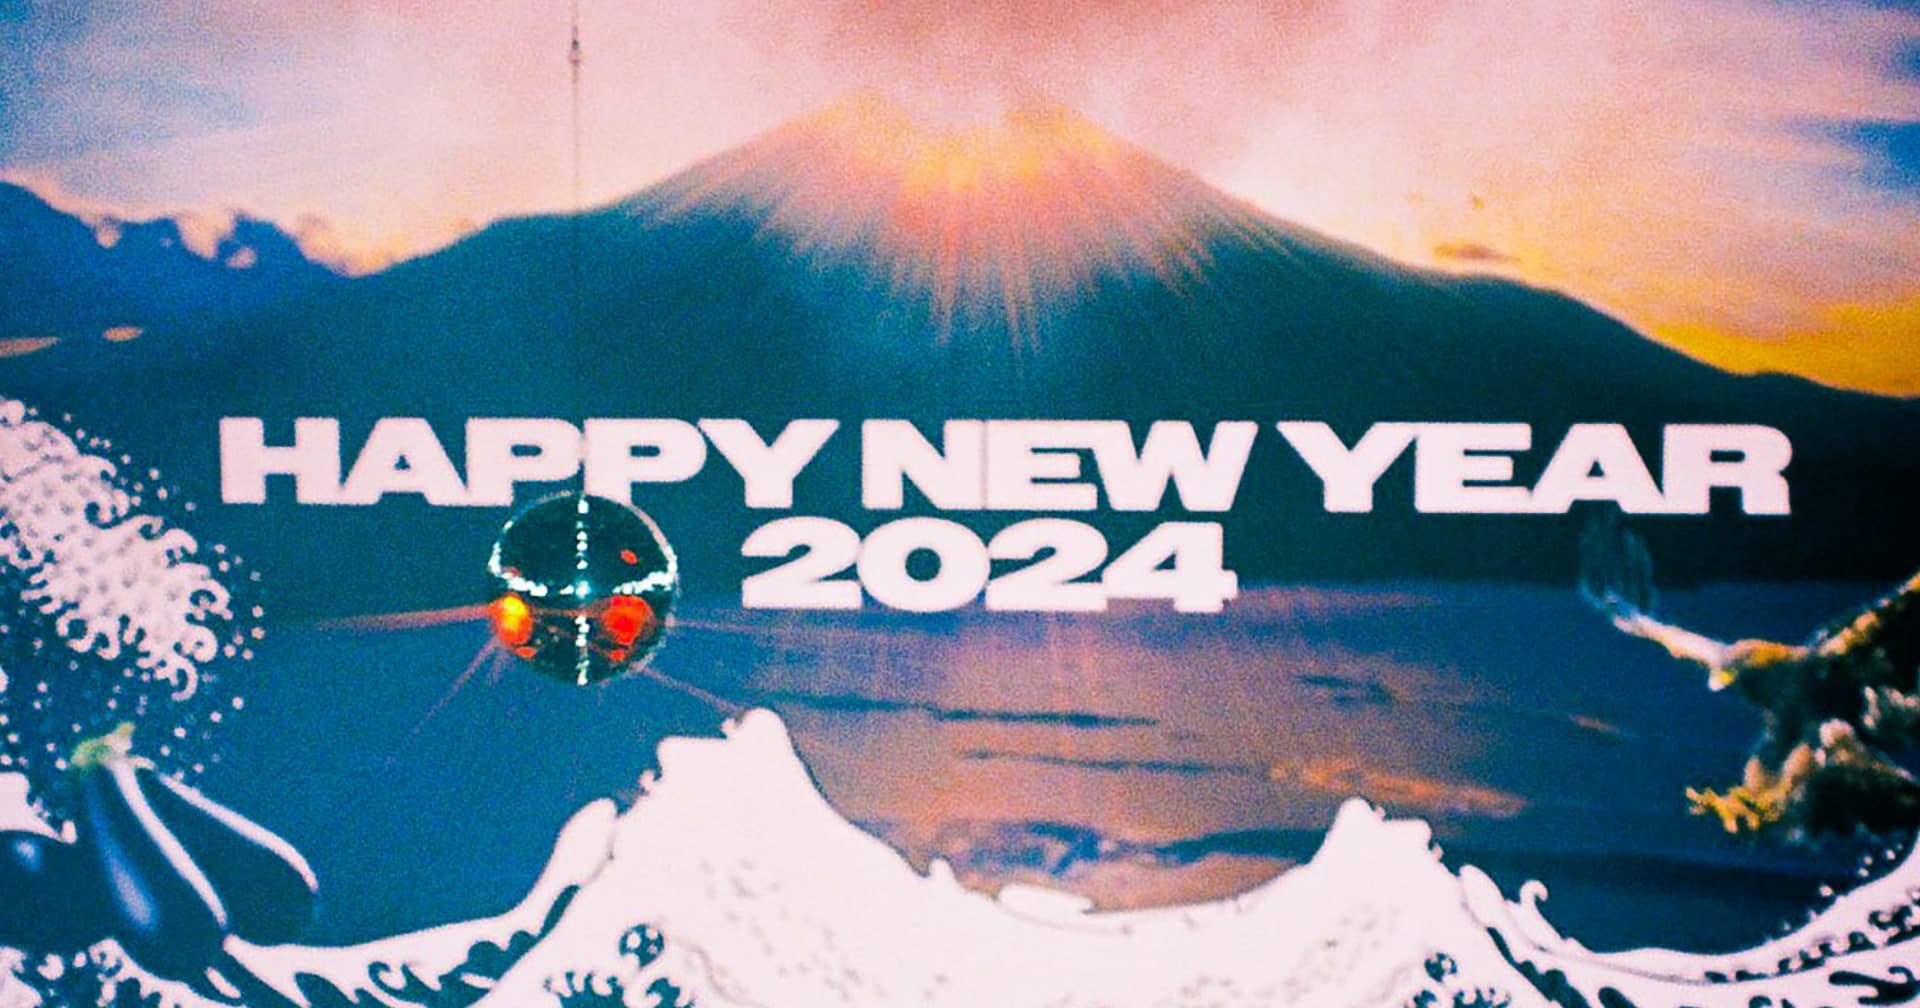 MNENYE’23 PARTY REPORT 2023.12.31 SUN